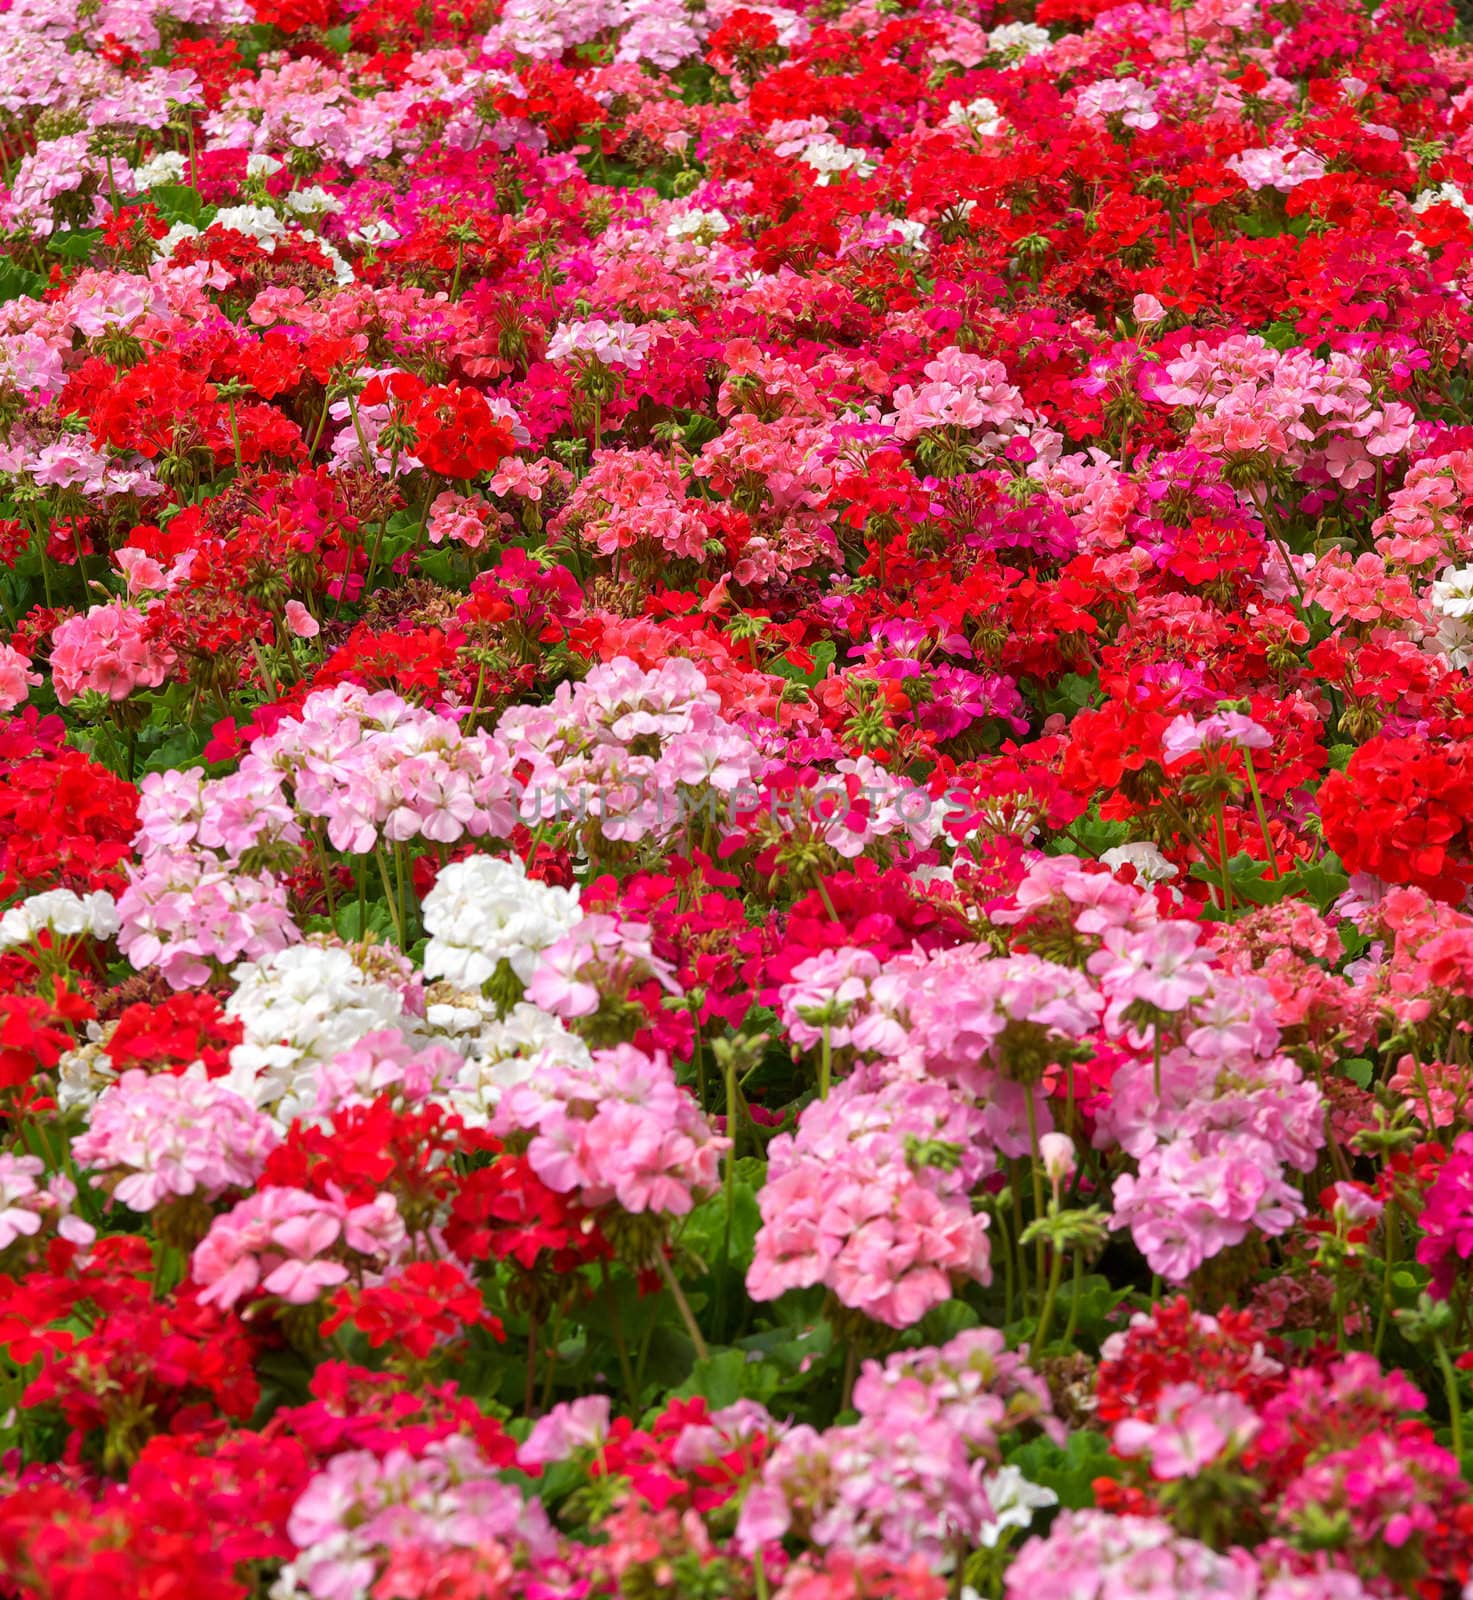 heaps of geraniums for a beautiful floral background